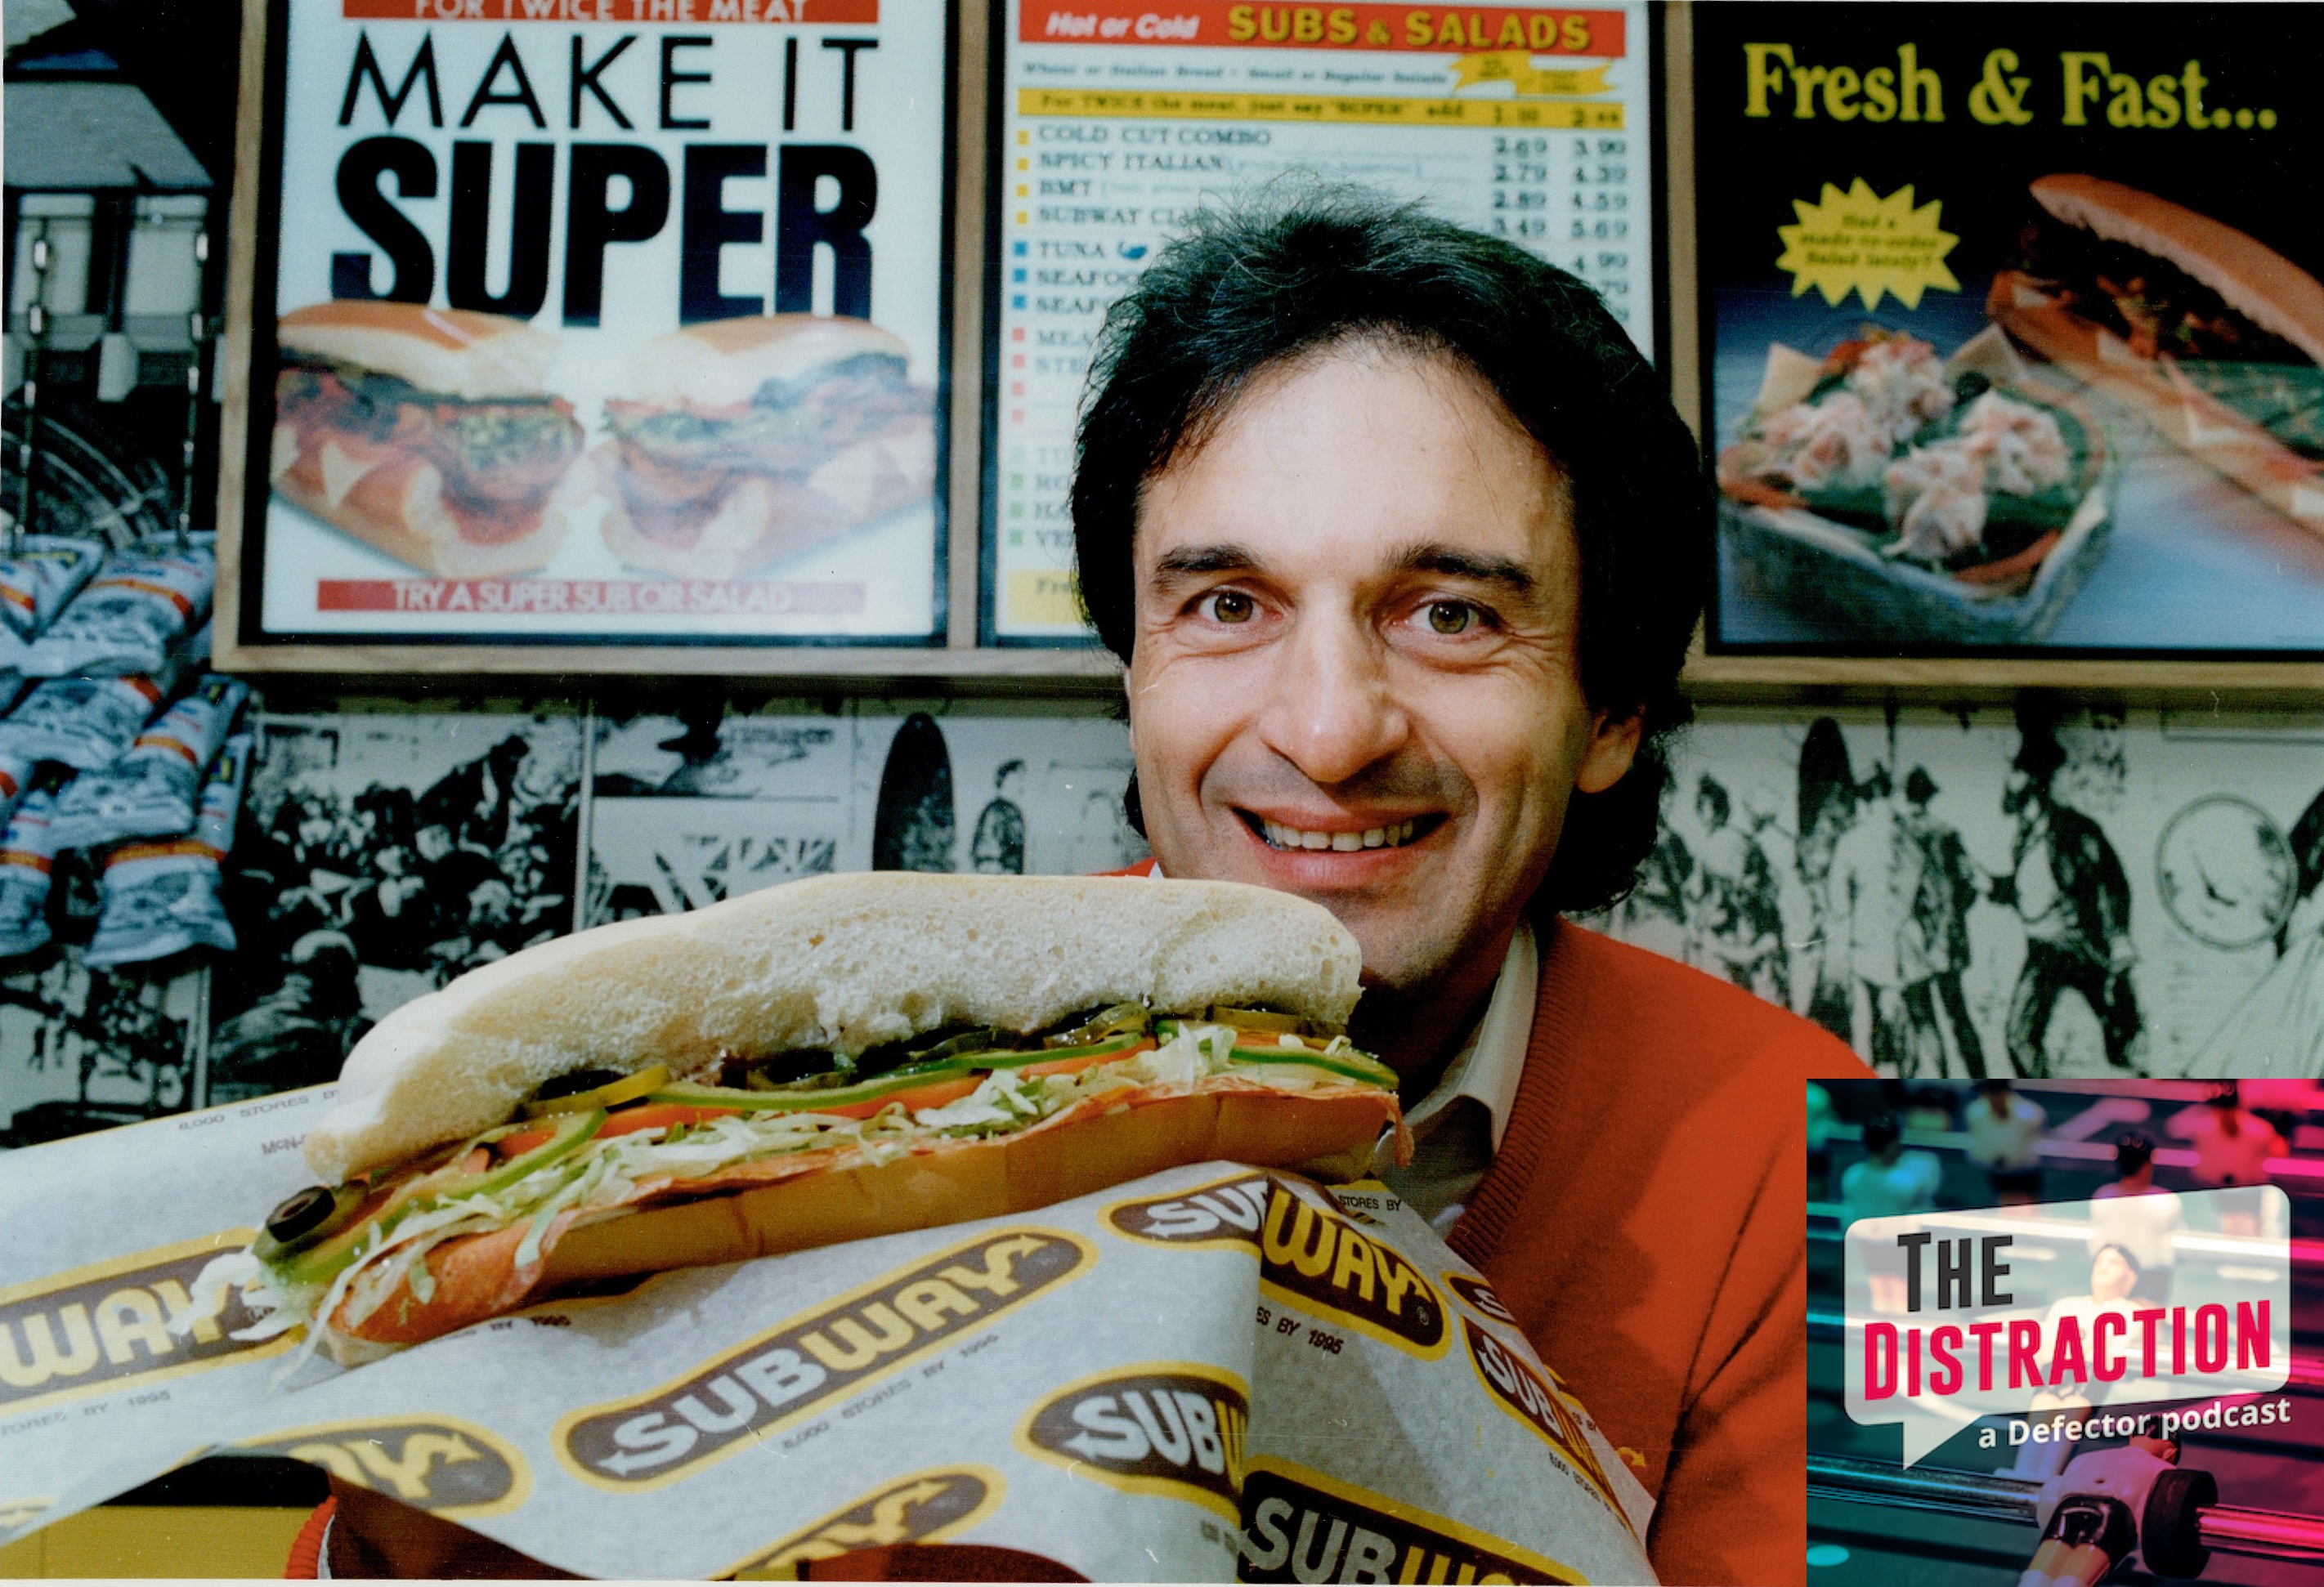 o-founder of Subway, Fred DeLuca poses for a portrait in February 1991 in Toronto Canada.